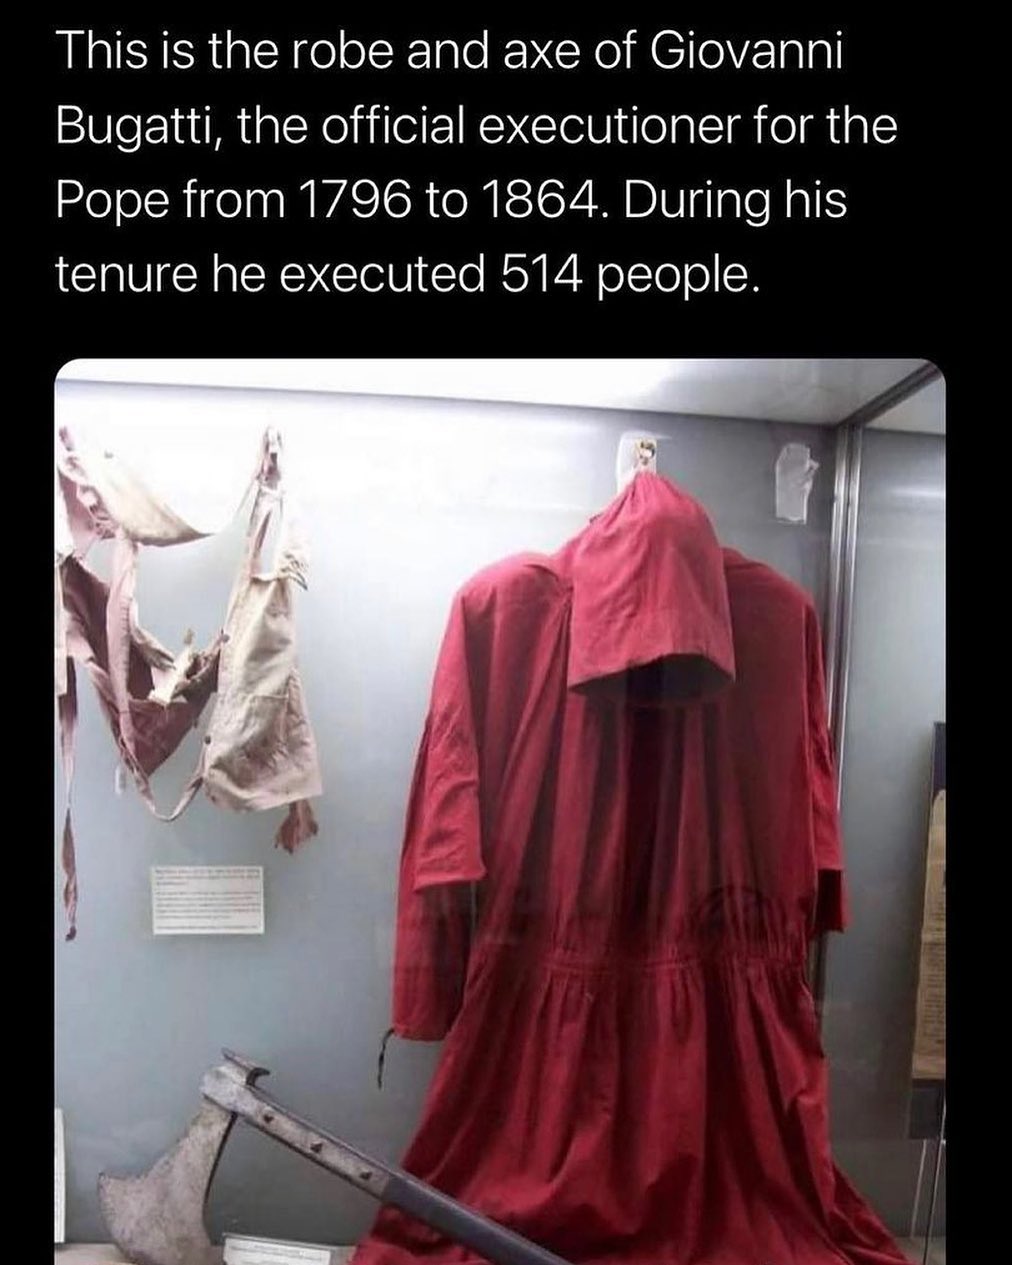 monday morning randomness -  giovanni battista bugatti robes - This is the robe and axe of Giovanni Bugatti, the official executioner for the Pope from 1796 to 1864. During his tenure he executed 514 people.